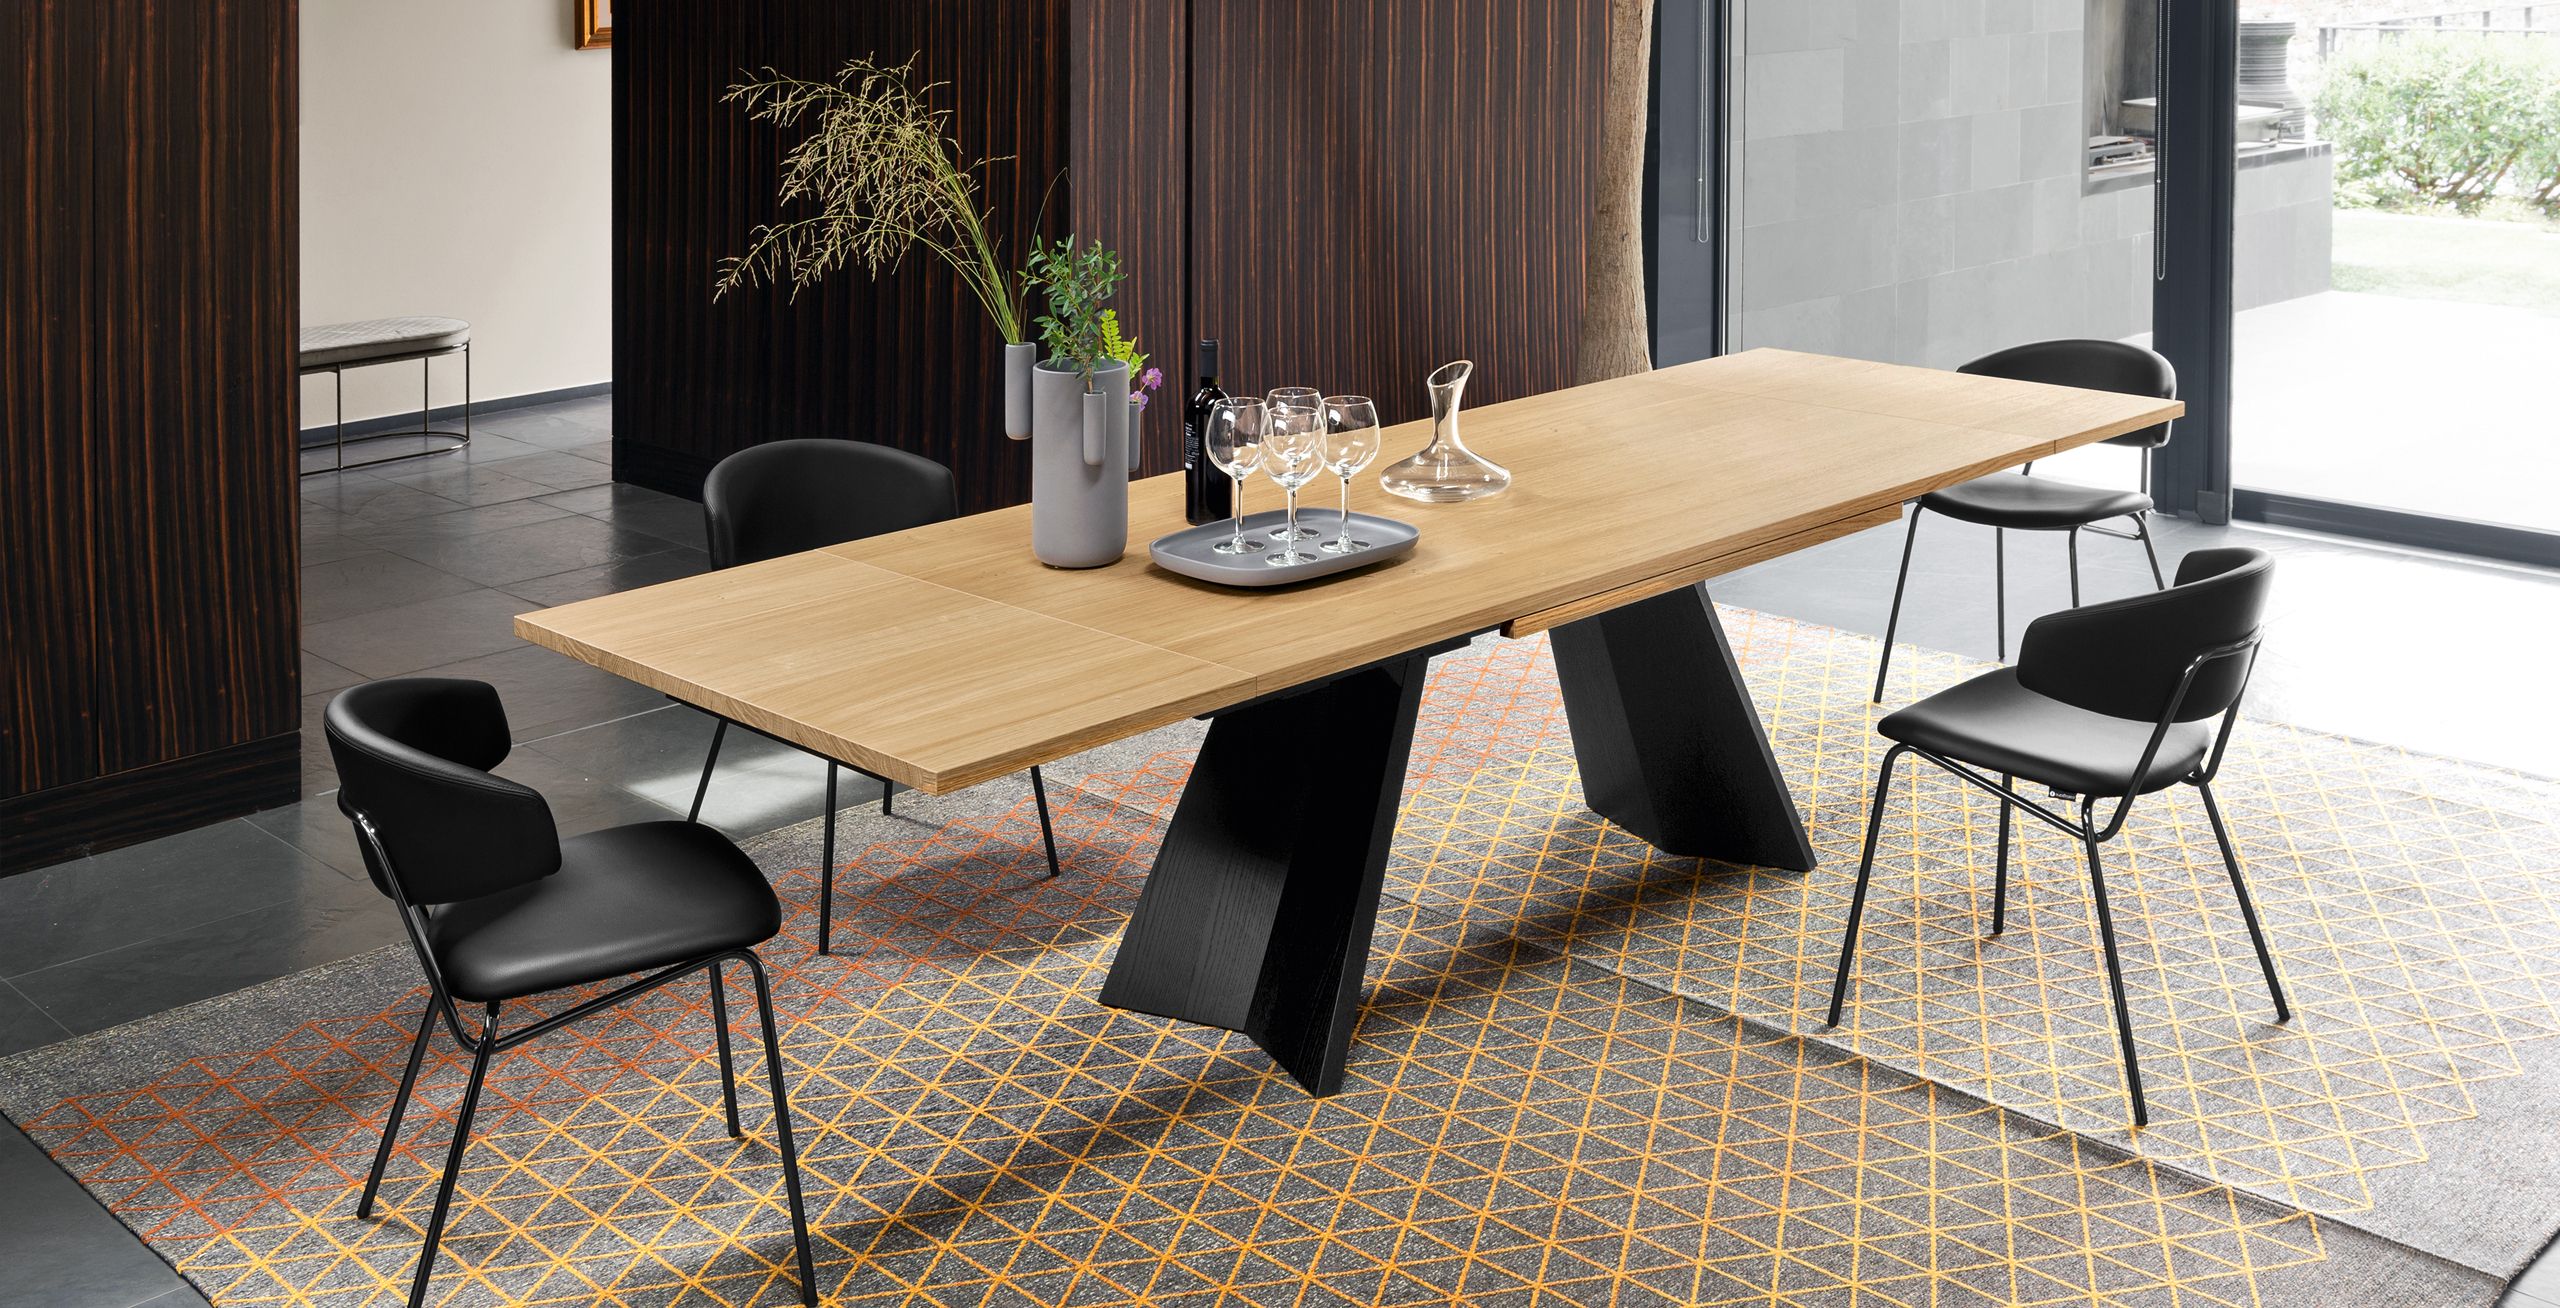 Home Furniture: Italian Design Furnishingcalligaris – Calligaris For Most Up To Date North Reading 5 Piece Dining Table Sets (View 19 of 20)